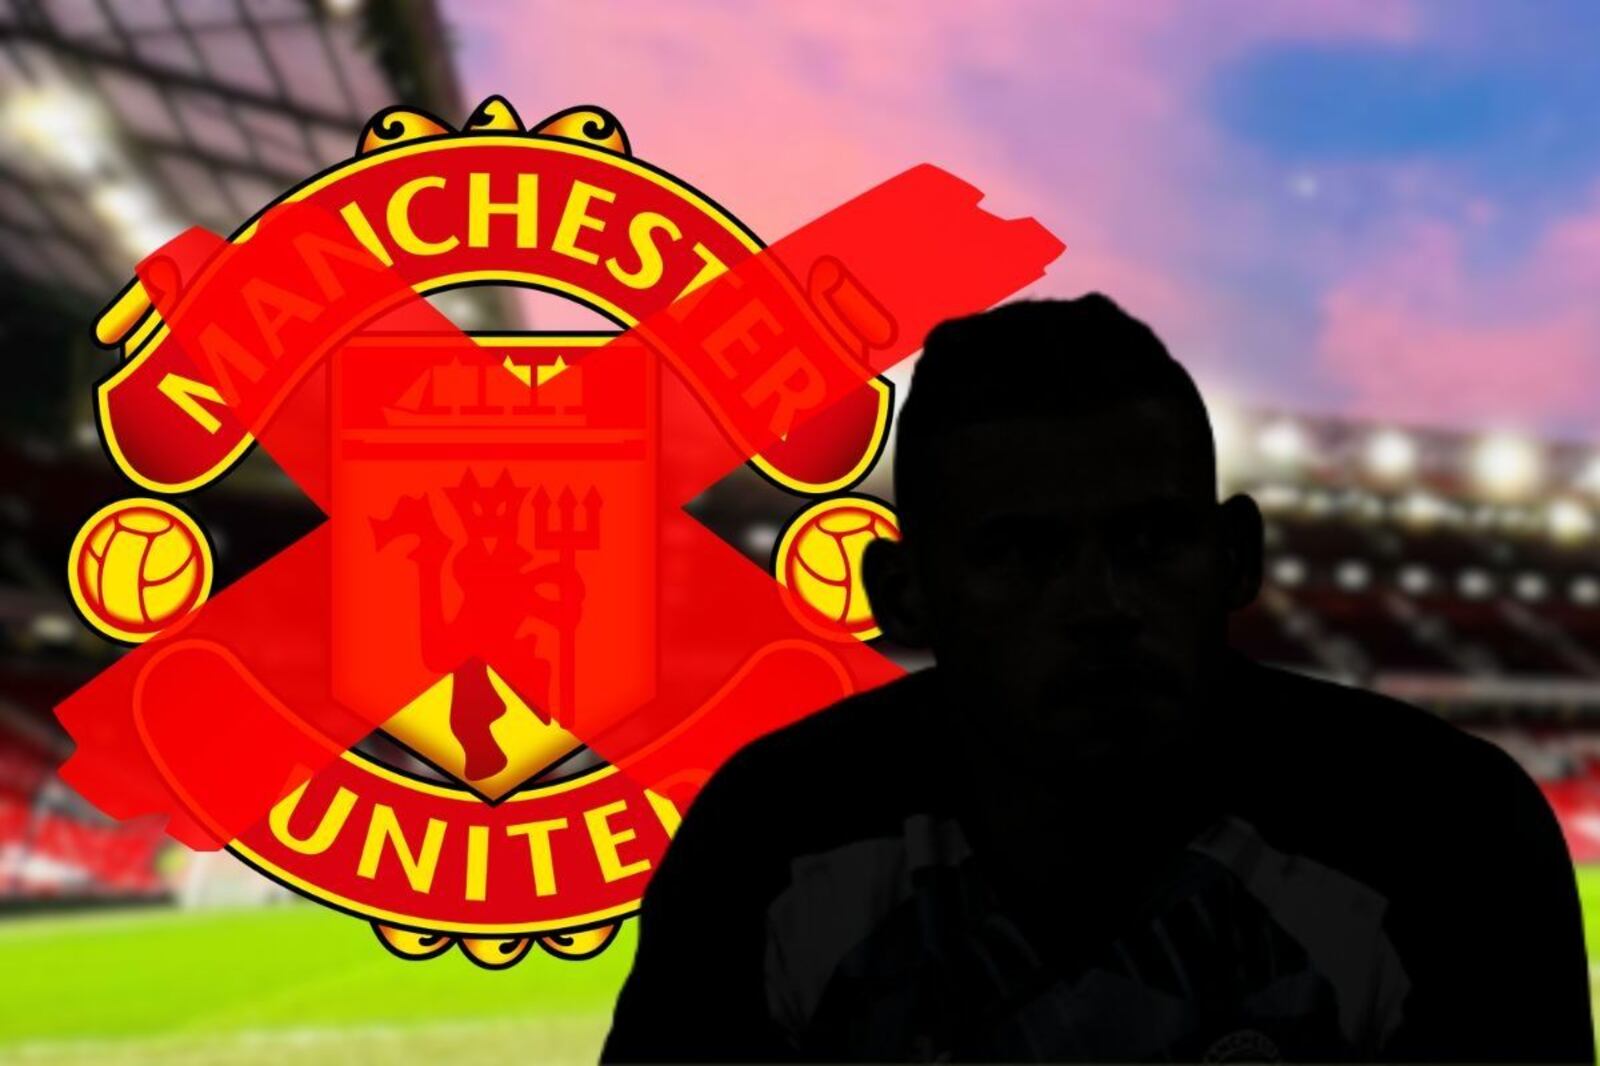 The player who rejected Manchester United regrets and is now desperate to find a team